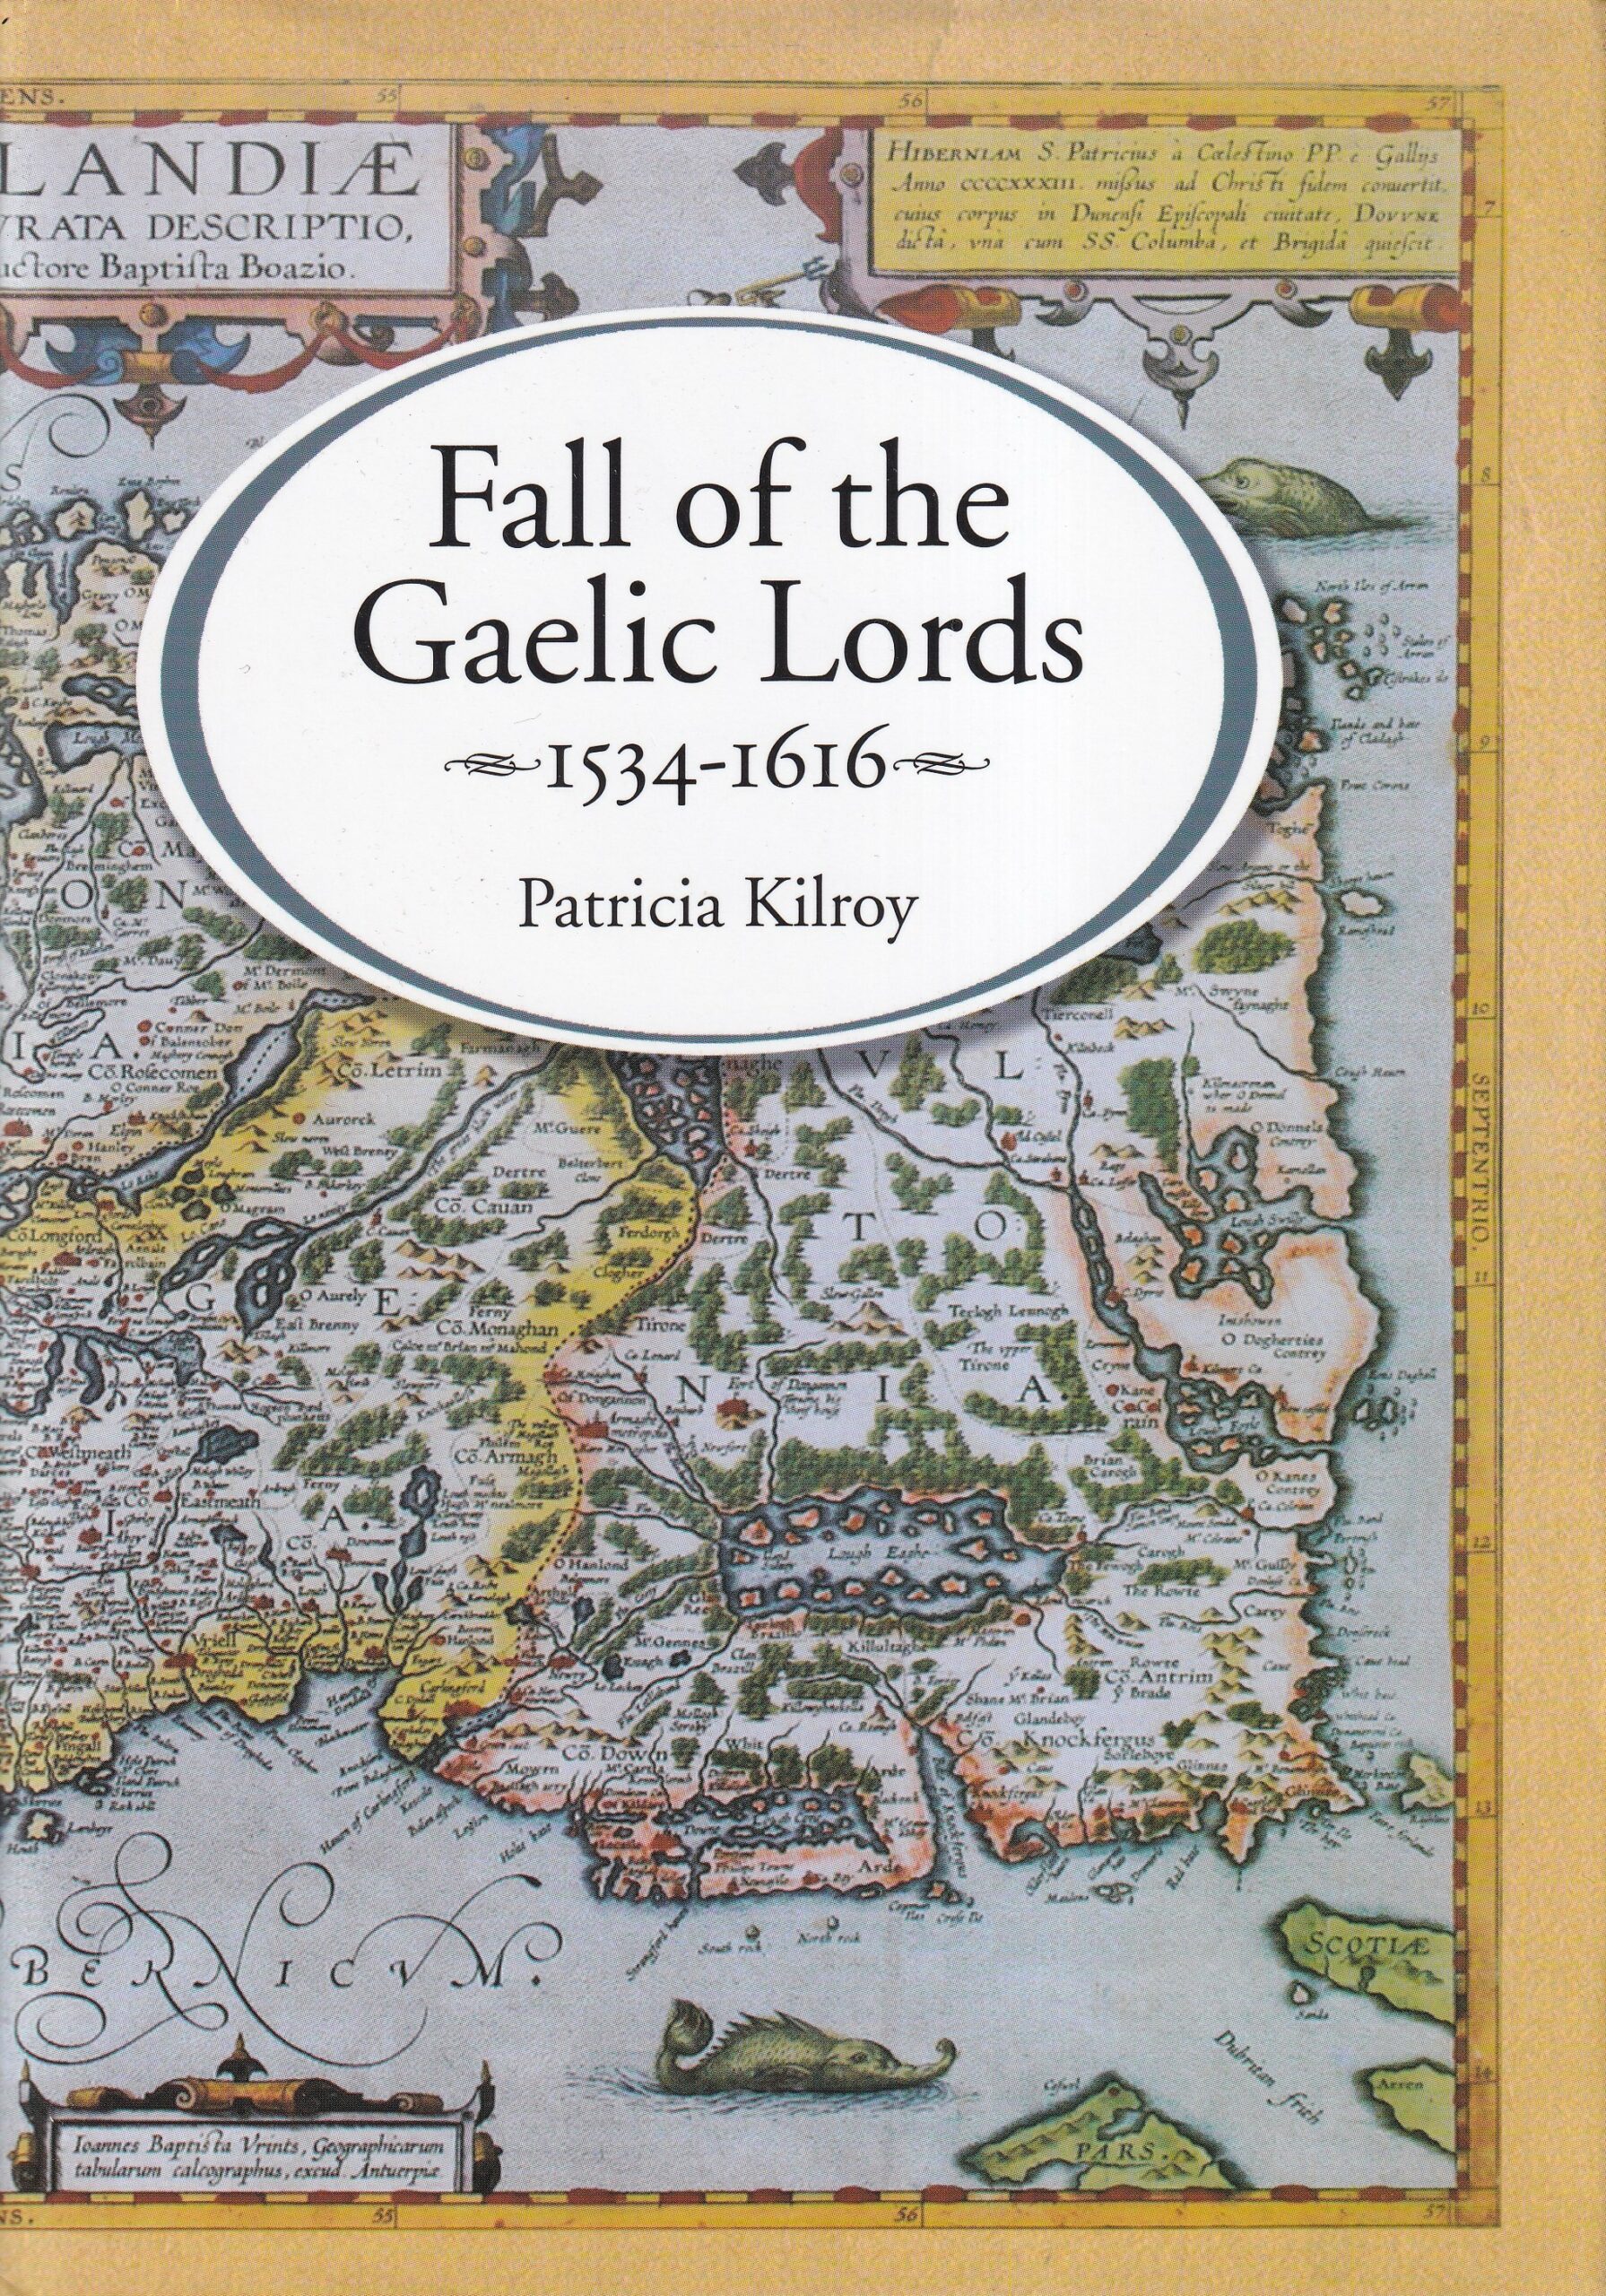 Fall of the Gaelic Lords 1534-1616- Signed by Patricia Kilroy